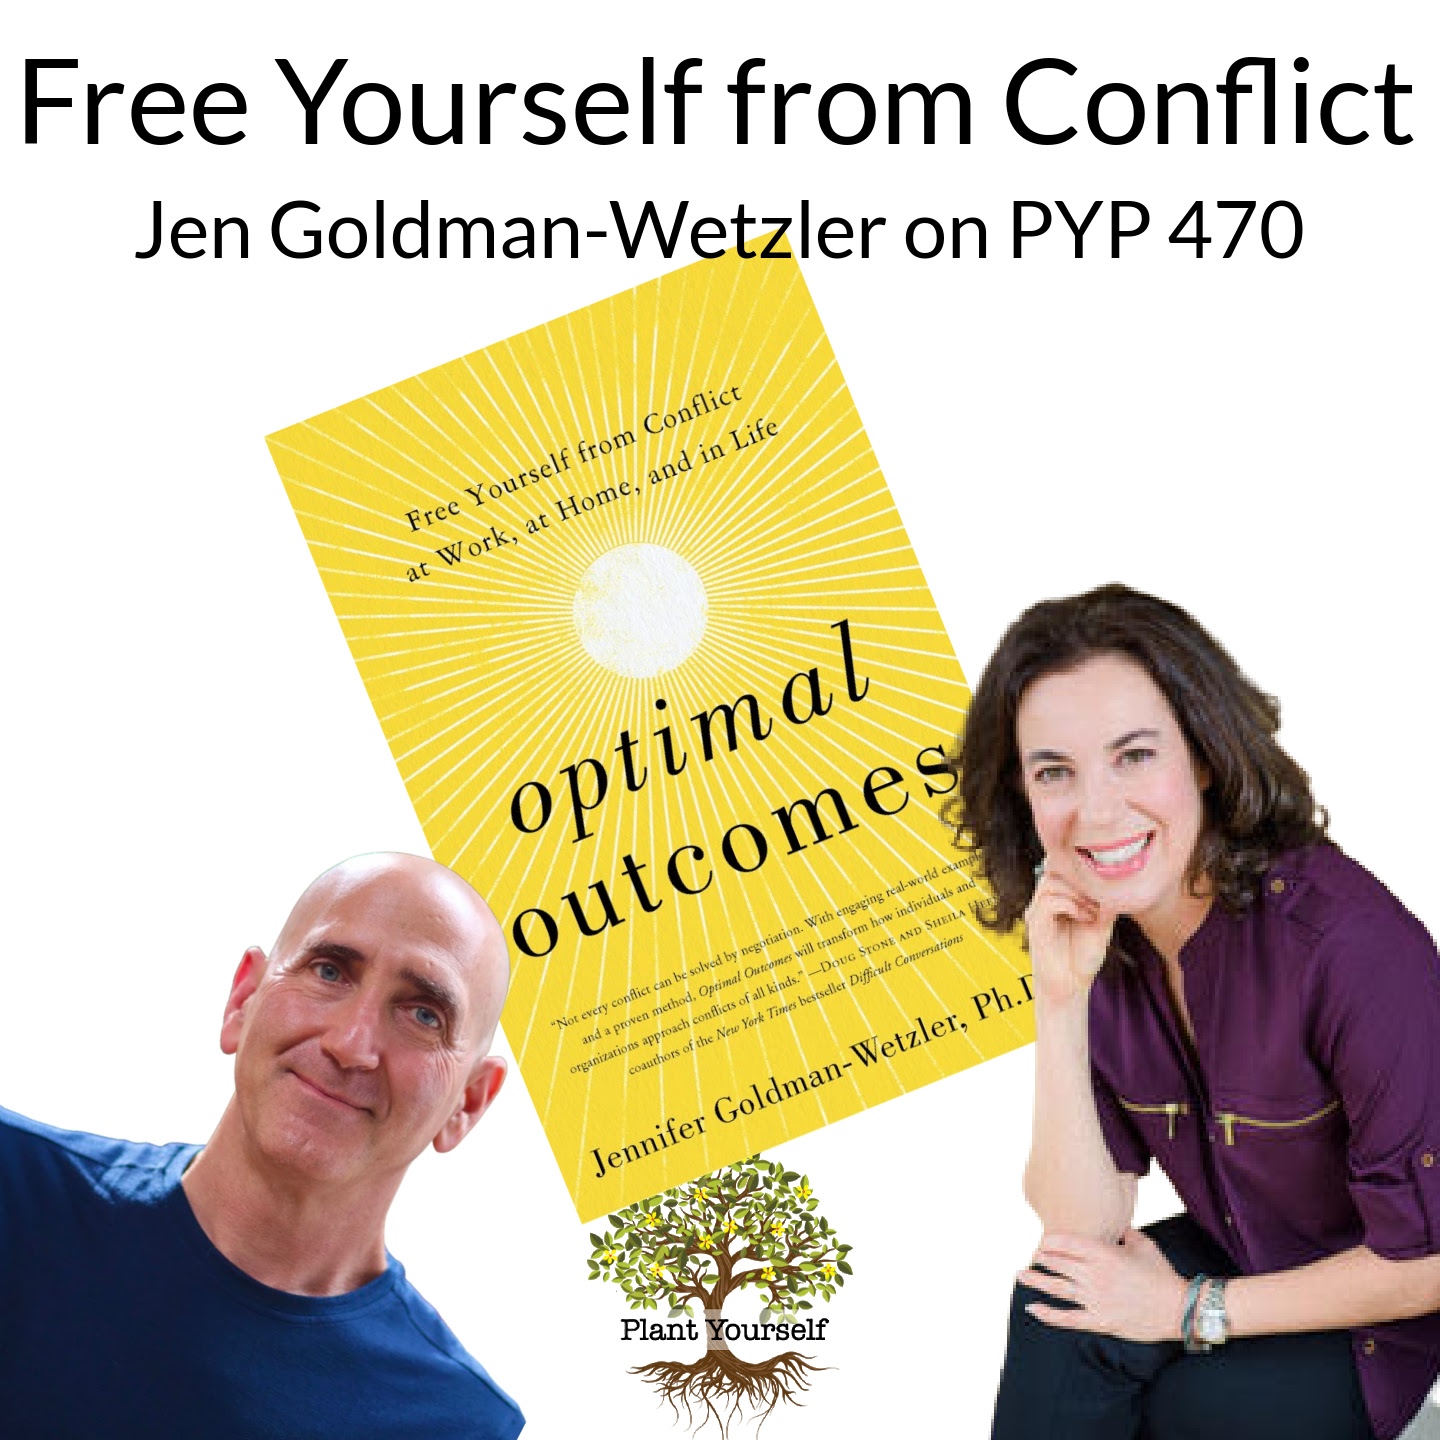 Free Yourself from Conflict: Jen Goldman-Wetzler on PYP 470